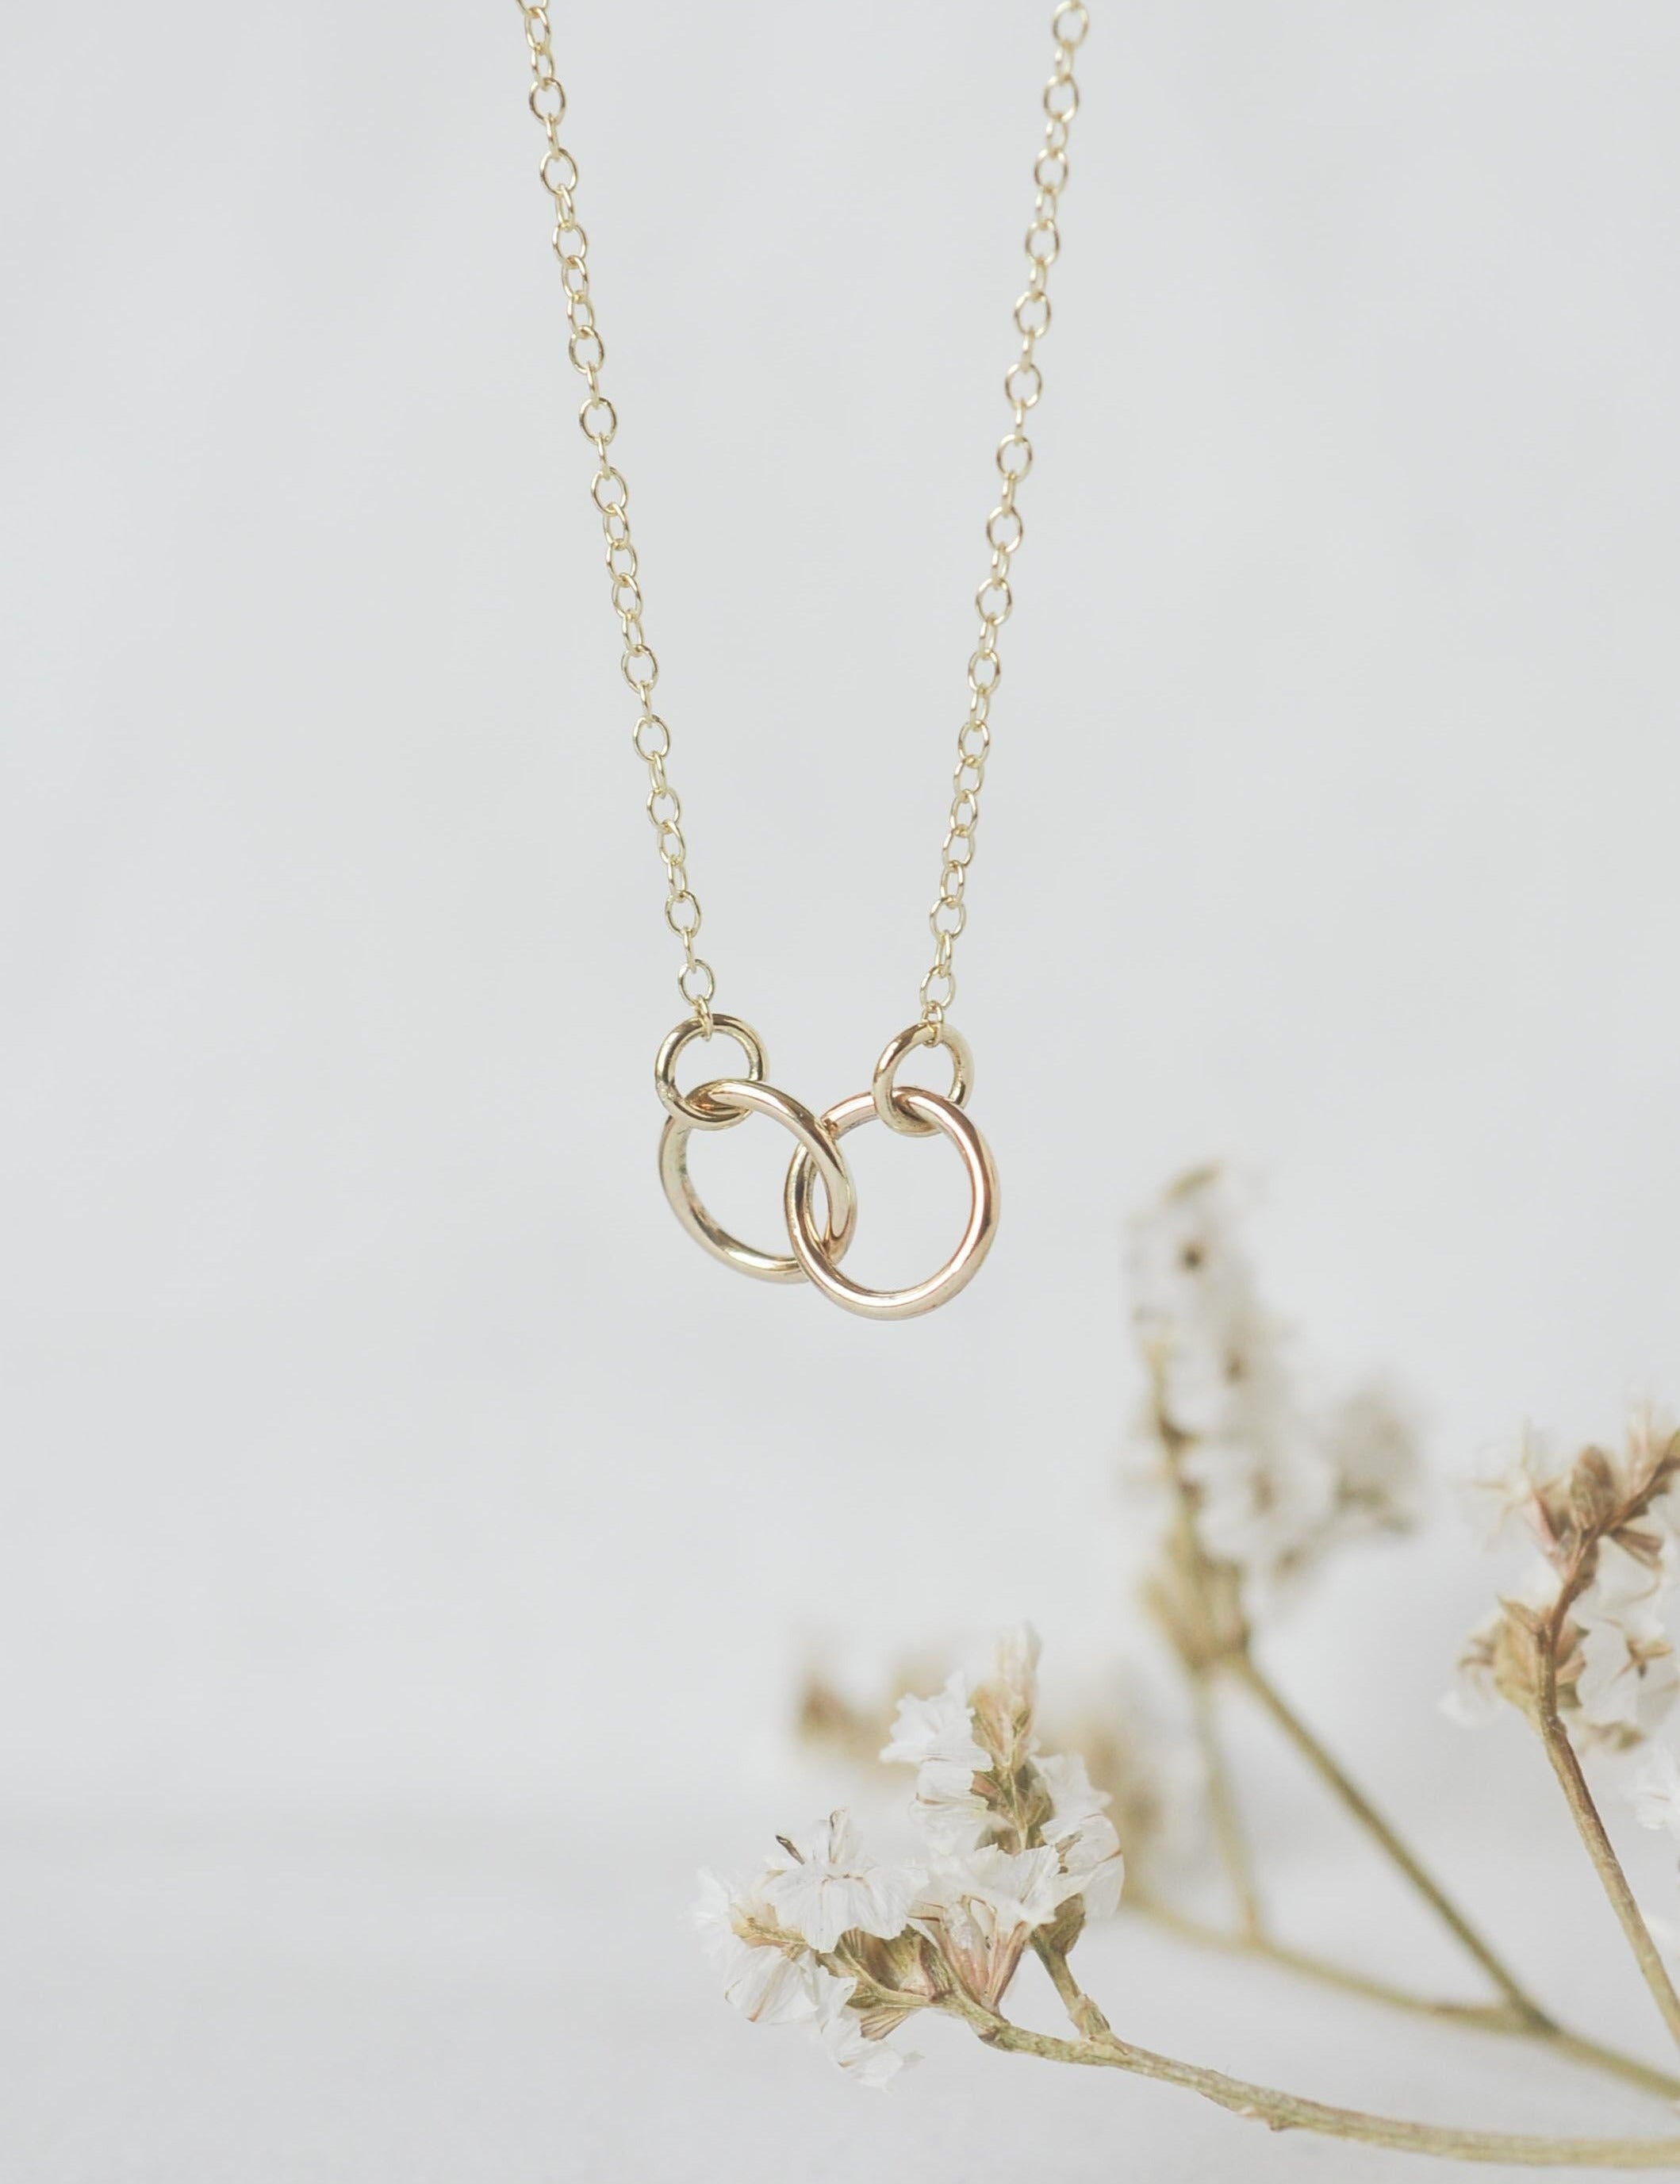 9ct-connected-circle-necklace-wild-fawn-jewellery-ss20-n11-g-45-3.jpg